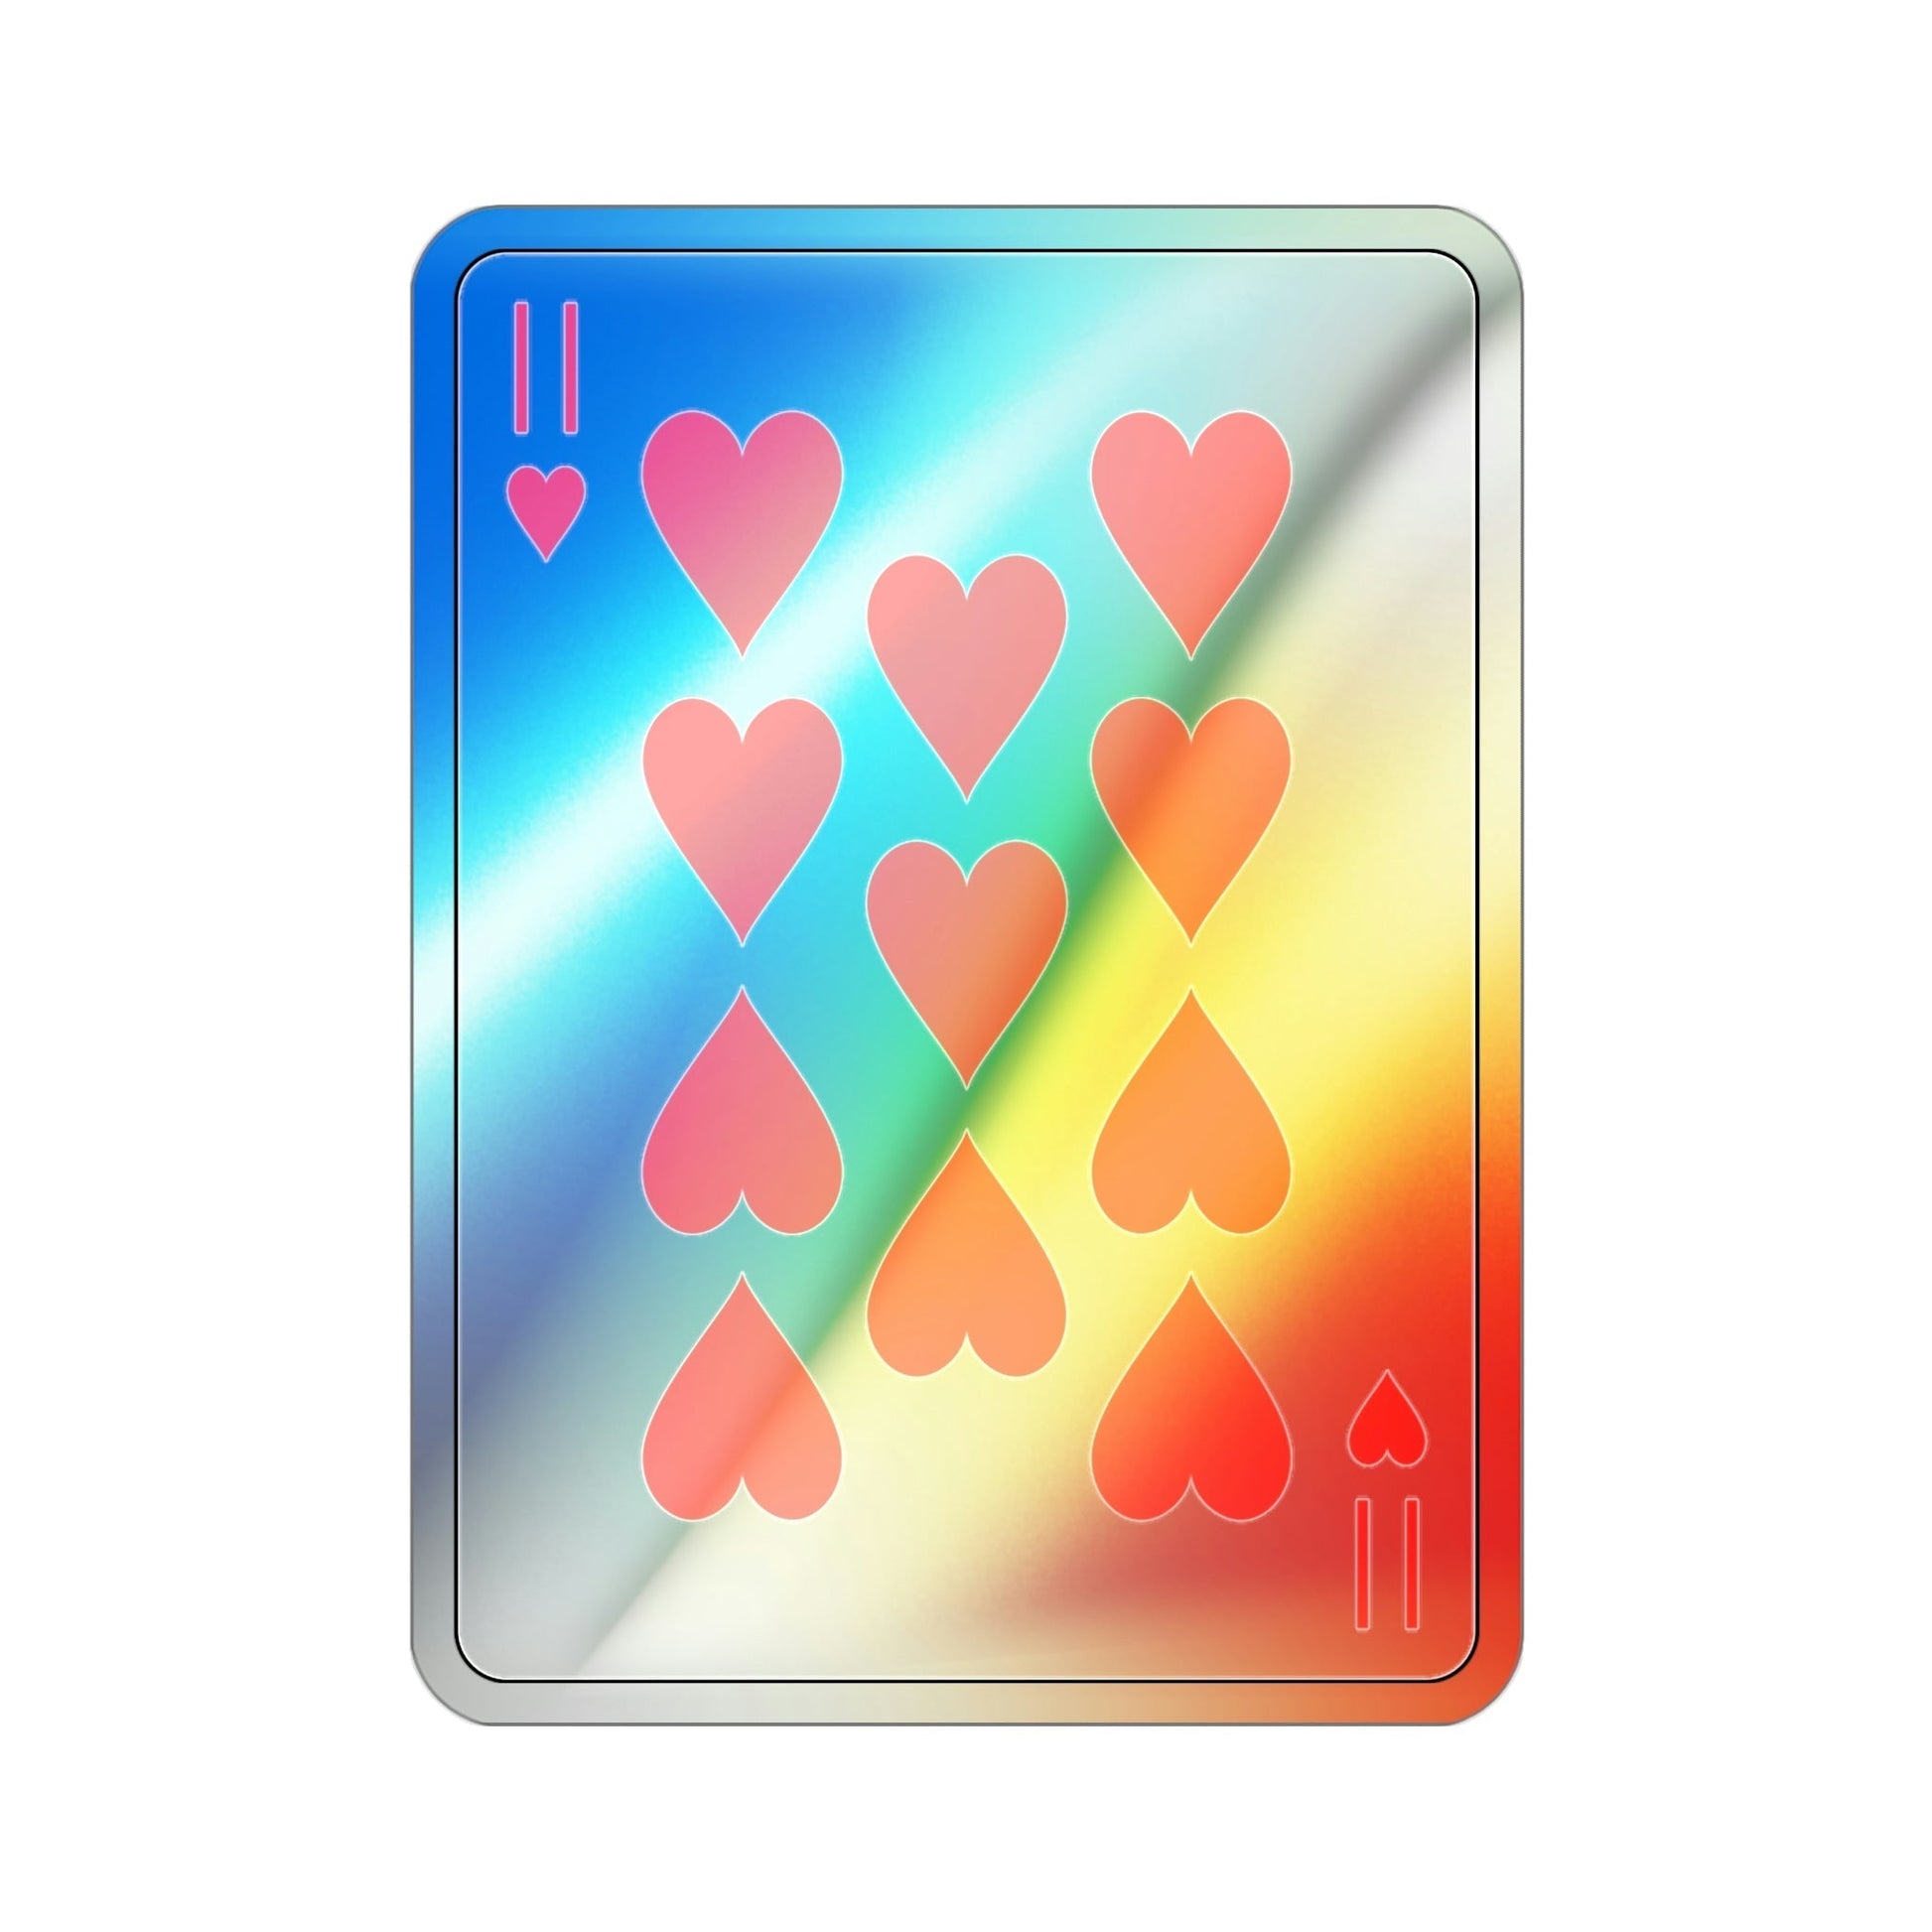 11 of Hearts Playing Card Holographic STICKER Die-Cut Vinyl Decal-3 Inch-The Sticker Space